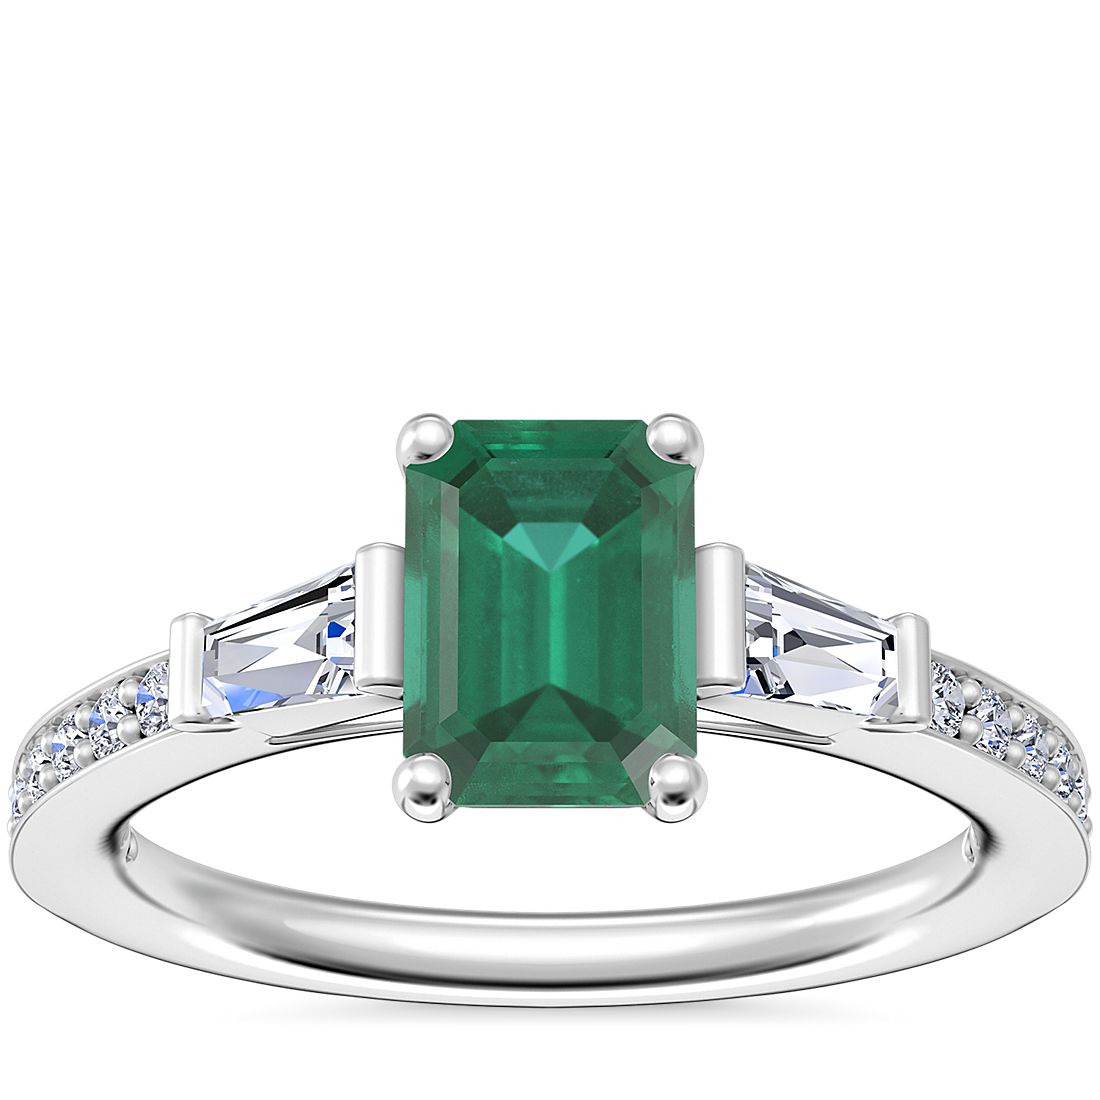 Tapered Baguette Diamond Cathedral Engagement Ring with Emerald-Cut Emerald in Platinum (7x5mm)